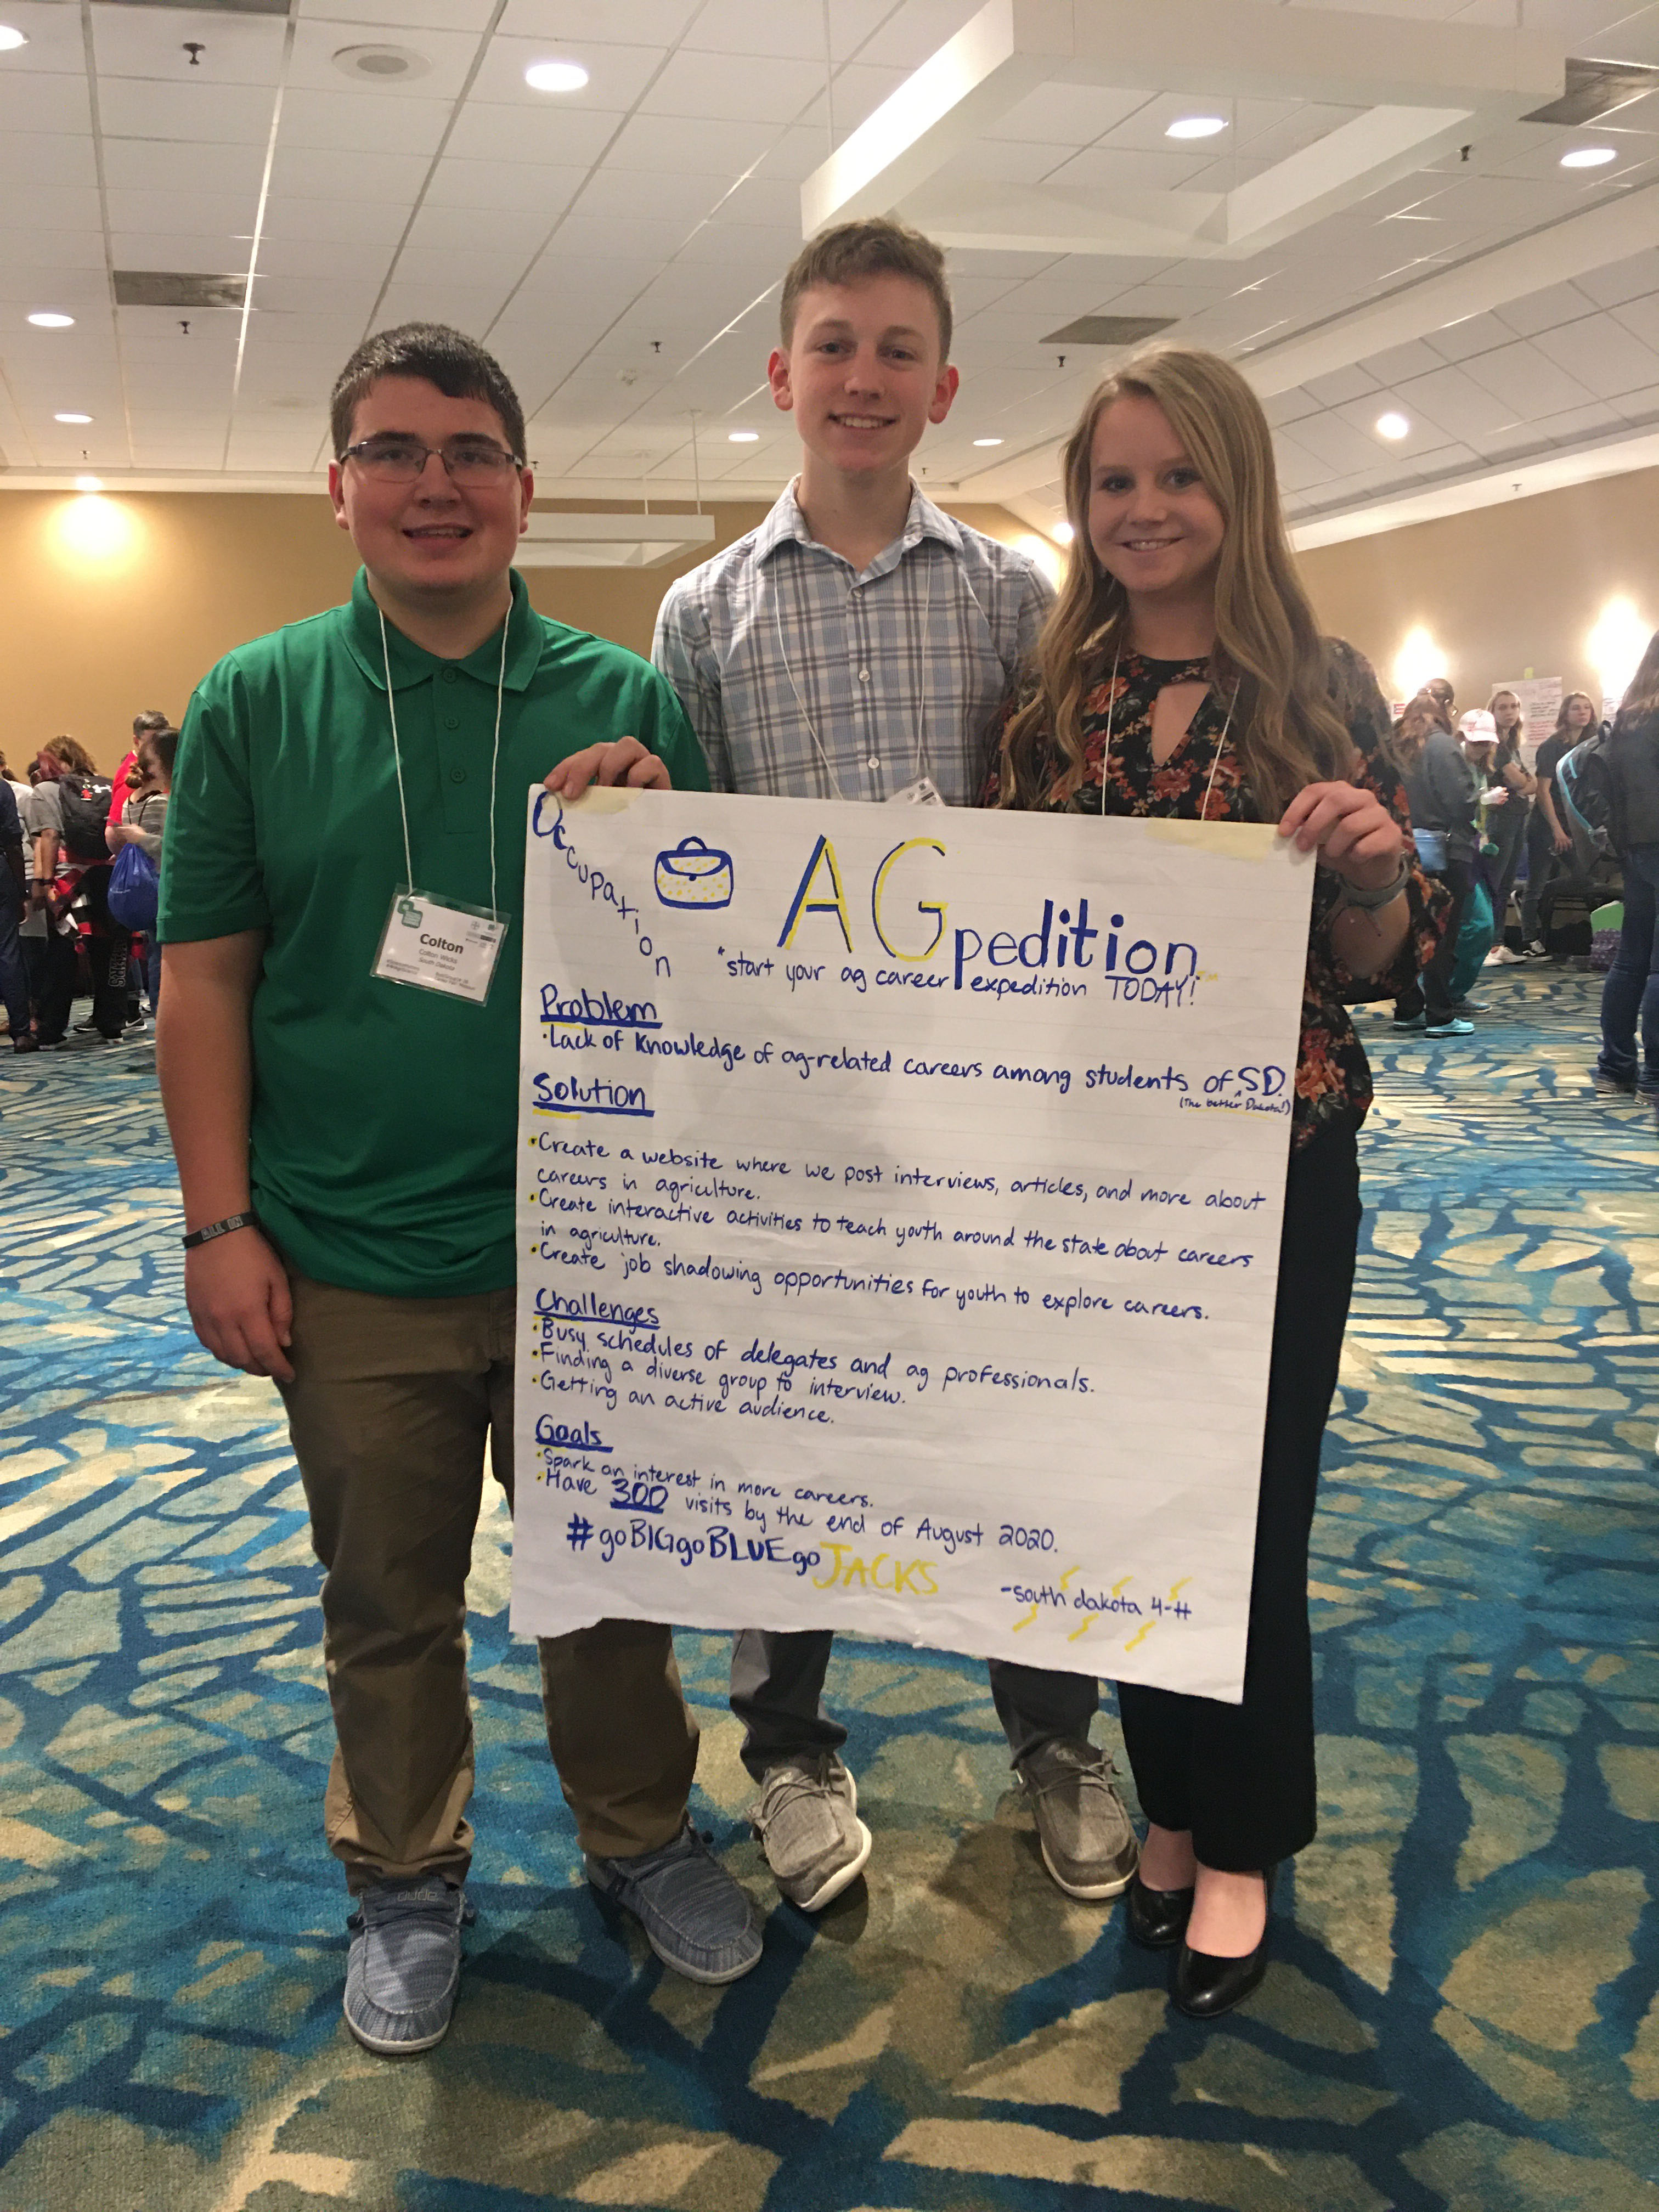 an image of three youth at a conference holding a sign they created